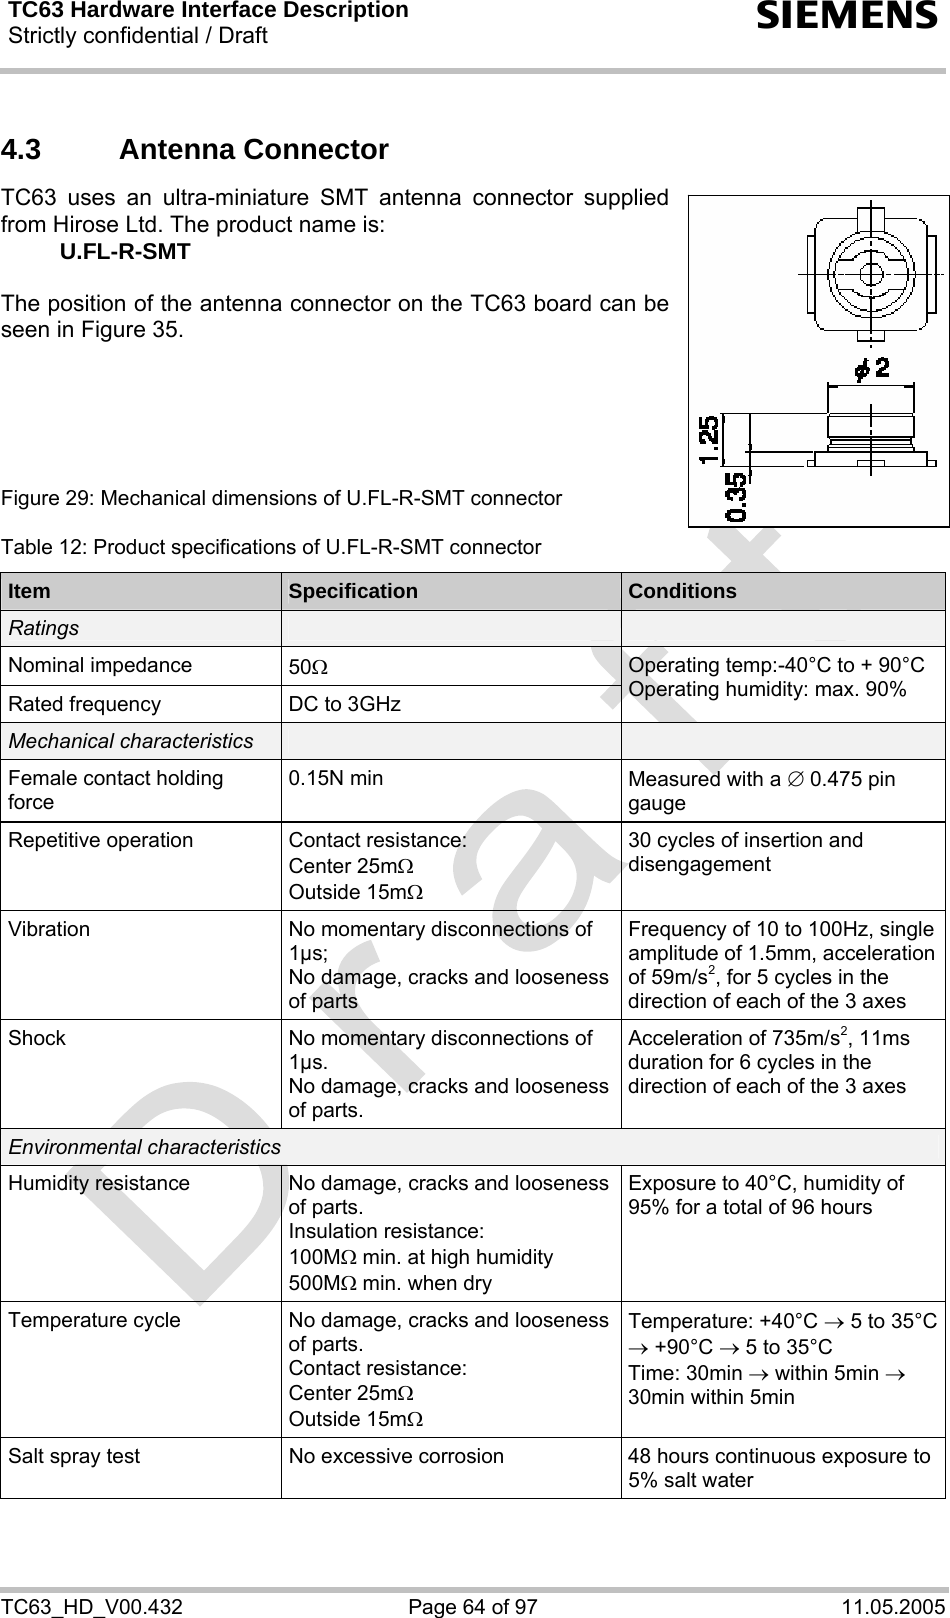 TC63 Hardware Interface Description Strictly confidential / Draft  s TC63_HD_V00.432  Page 64 of 97  11.05.2005 4.3  Antenna Connector  TC63 uses an ultra-miniature SMT antenna connector supplied from Hirose Ltd. The product name is:  U.FL-R-SMT  The position of the antenna connector on the TC63 board can be seen in Figure 35.      Figure 29: Mechanical dimensions of U.FL-R-SMT connector  Table 12: Product specifications of U.FL-R-SMT connector Item  Specification  Conditions Ratings     Nominal impedance  50Ω Rated frequency  DC to 3GHz Operating temp:-40°C to + 90°C Operating humidity: max. 90% Mechanical characteristics     Female contact holding force 0.15N min  Measured with a ∅ 0.475 pin gauge Repetitive operation  Contact resistance: Center 25mΩ  Outside 15mΩ 30 cycles of insertion and disengagement Vibration  No momentary disconnections of 1µs; No damage, cracks and looseness of parts Frequency of 10 to 100Hz, single amplitude of 1.5mm, acceleration of 59m/s2, for 5 cycles in the direction of each of the 3 axes Shock  No momentary disconnections of 1µs. No damage, cracks and looseness of parts. Acceleration of 735m/s2, 11ms duration for 6 cycles in the direction of each of the 3 axes Environmental characteristics Humidity resistance  No damage, cracks and looseness of parts. Insulation resistance:  100MΩ min. at high humidity 500MΩ min. when dry Exposure to 40°C, humidity of 95% for a total of 96 hours Temperature cycle  No damage, cracks and looseness of parts. Contact resistance: Center 25mΩ  Outside 15mΩ Temperature: +40°C → 5 to 35°C → +90°C → 5 to 35°C Time: 30min → within 5min → 30min within 5min Salt spray test  No excessive corrosion  48 hours continuous exposure to 5% salt water  